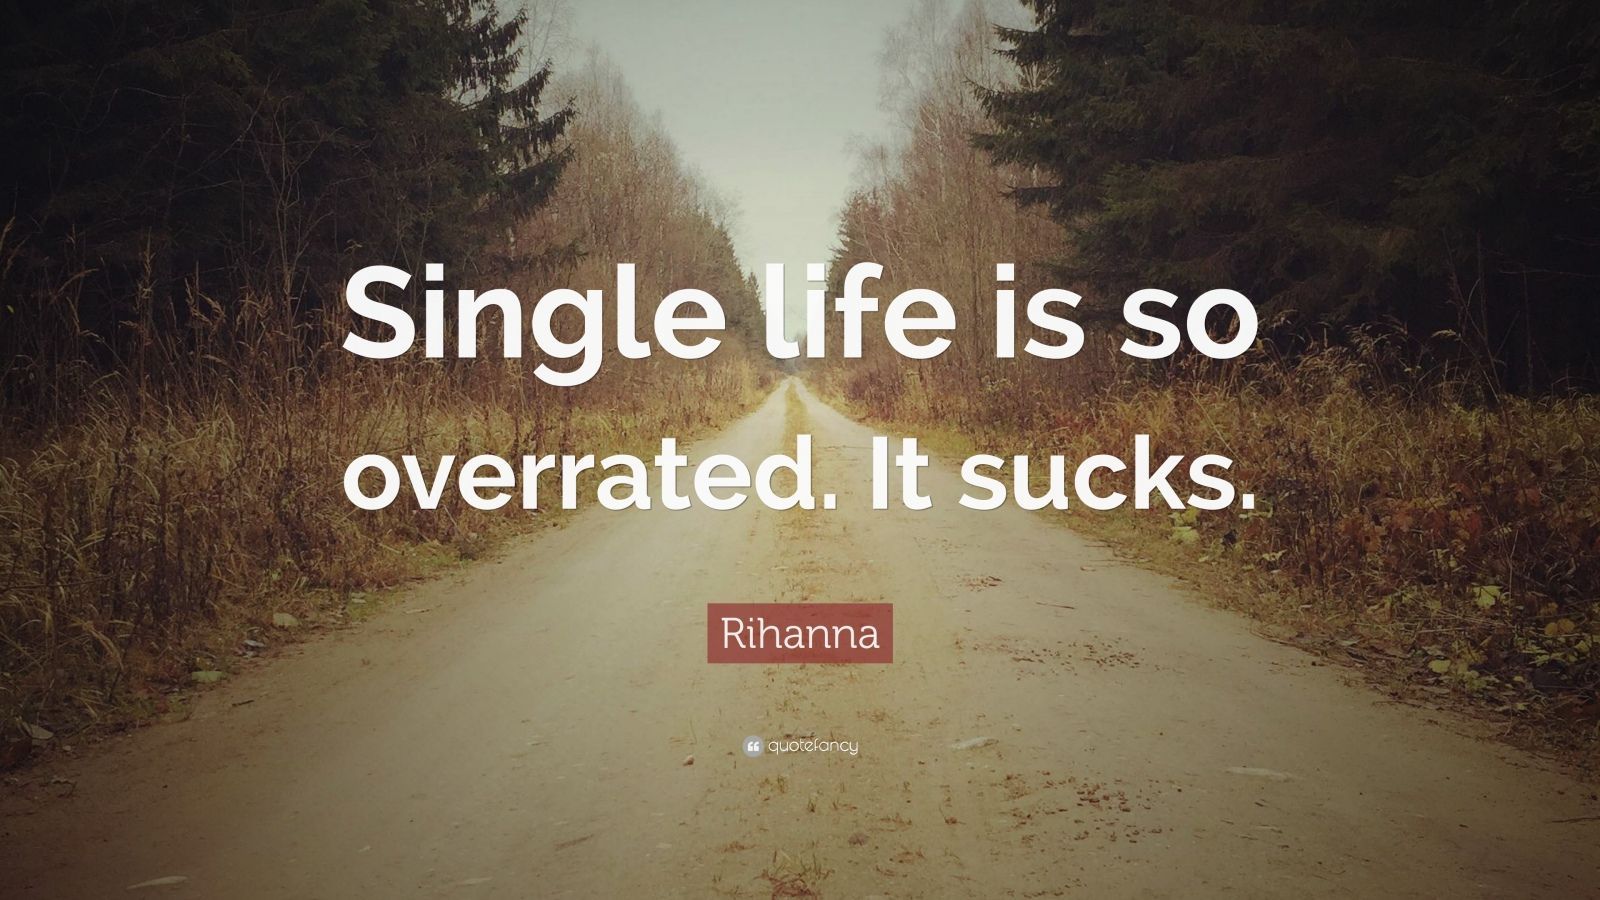 Rihanna Quote: “Single life is so overrated. It sucks.” (12 wallpaper)